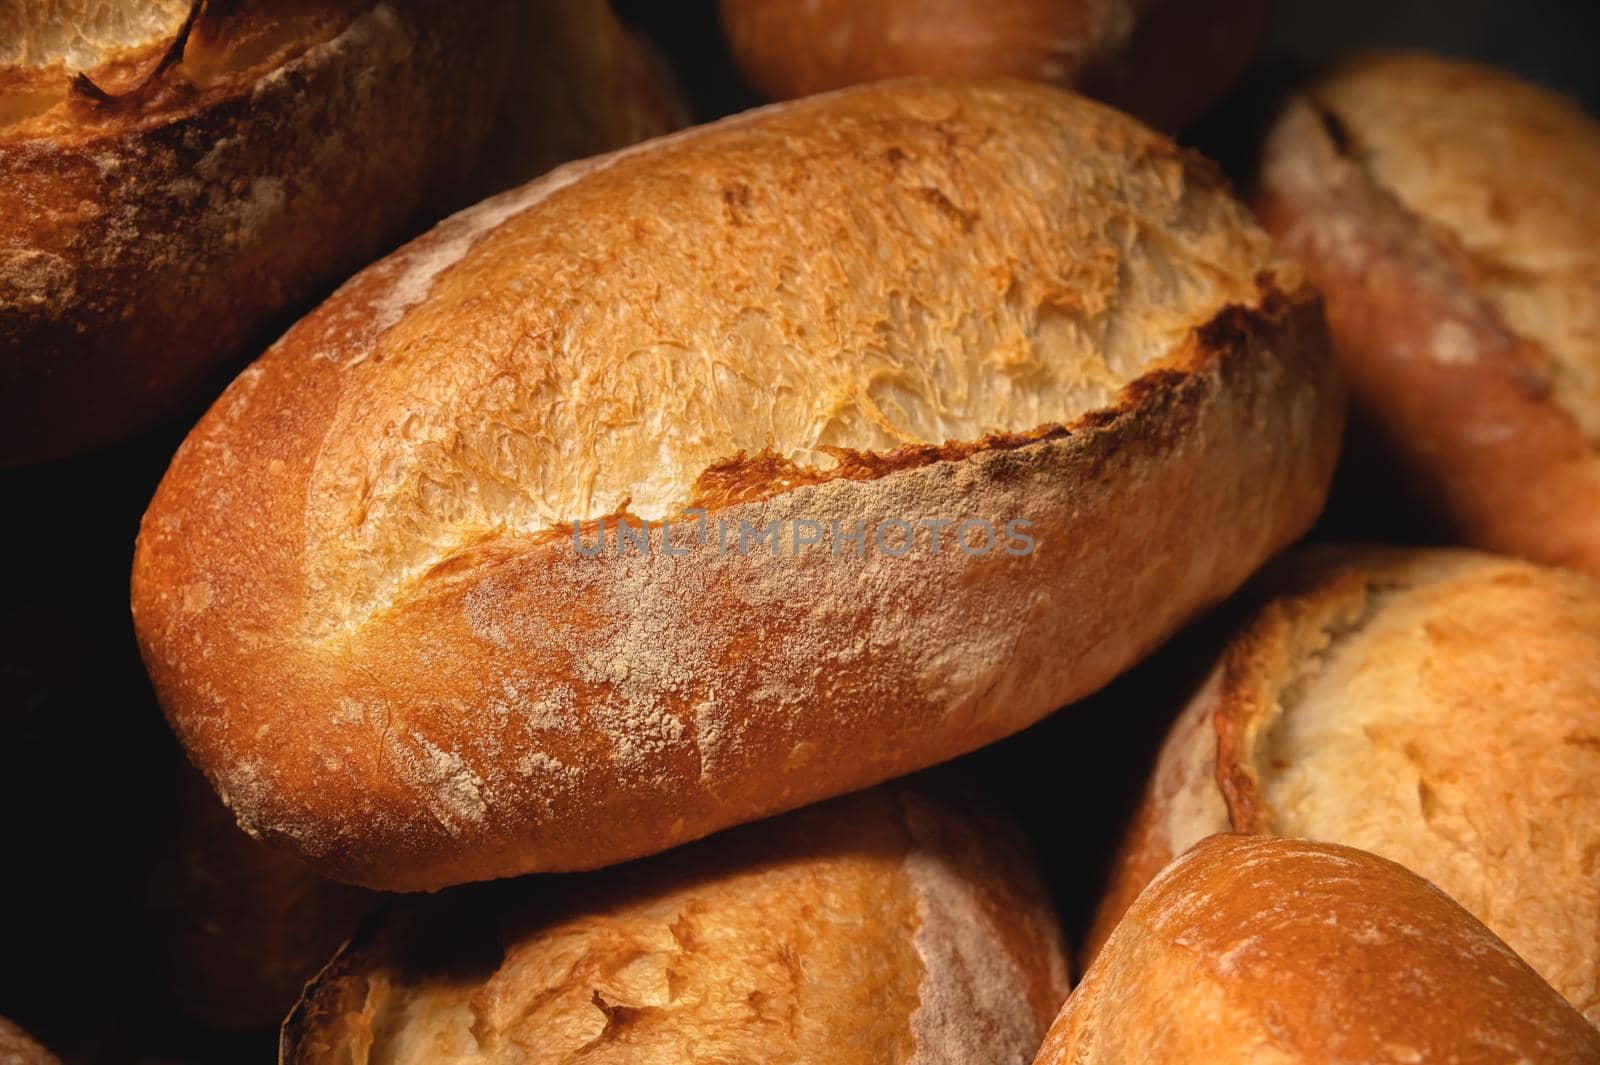 Fresh hot appetizing bread after baking in the oven. Close-up healthy and tasty food.